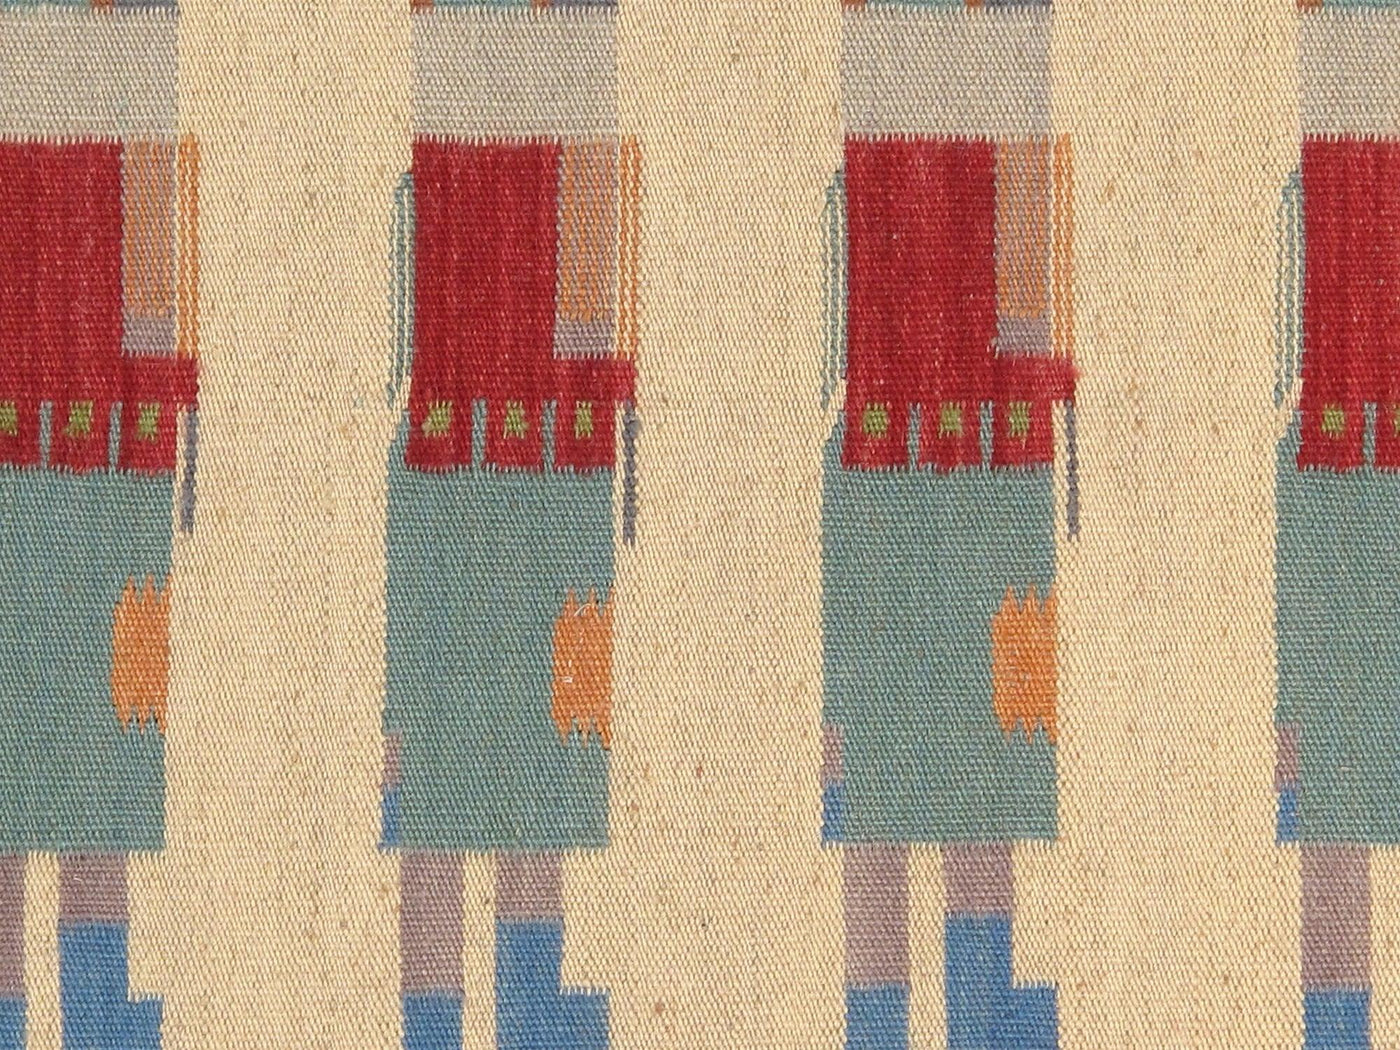 Canvello Hand-Woven Wool Navajo Style Rugs - 2'7" X 3'11"